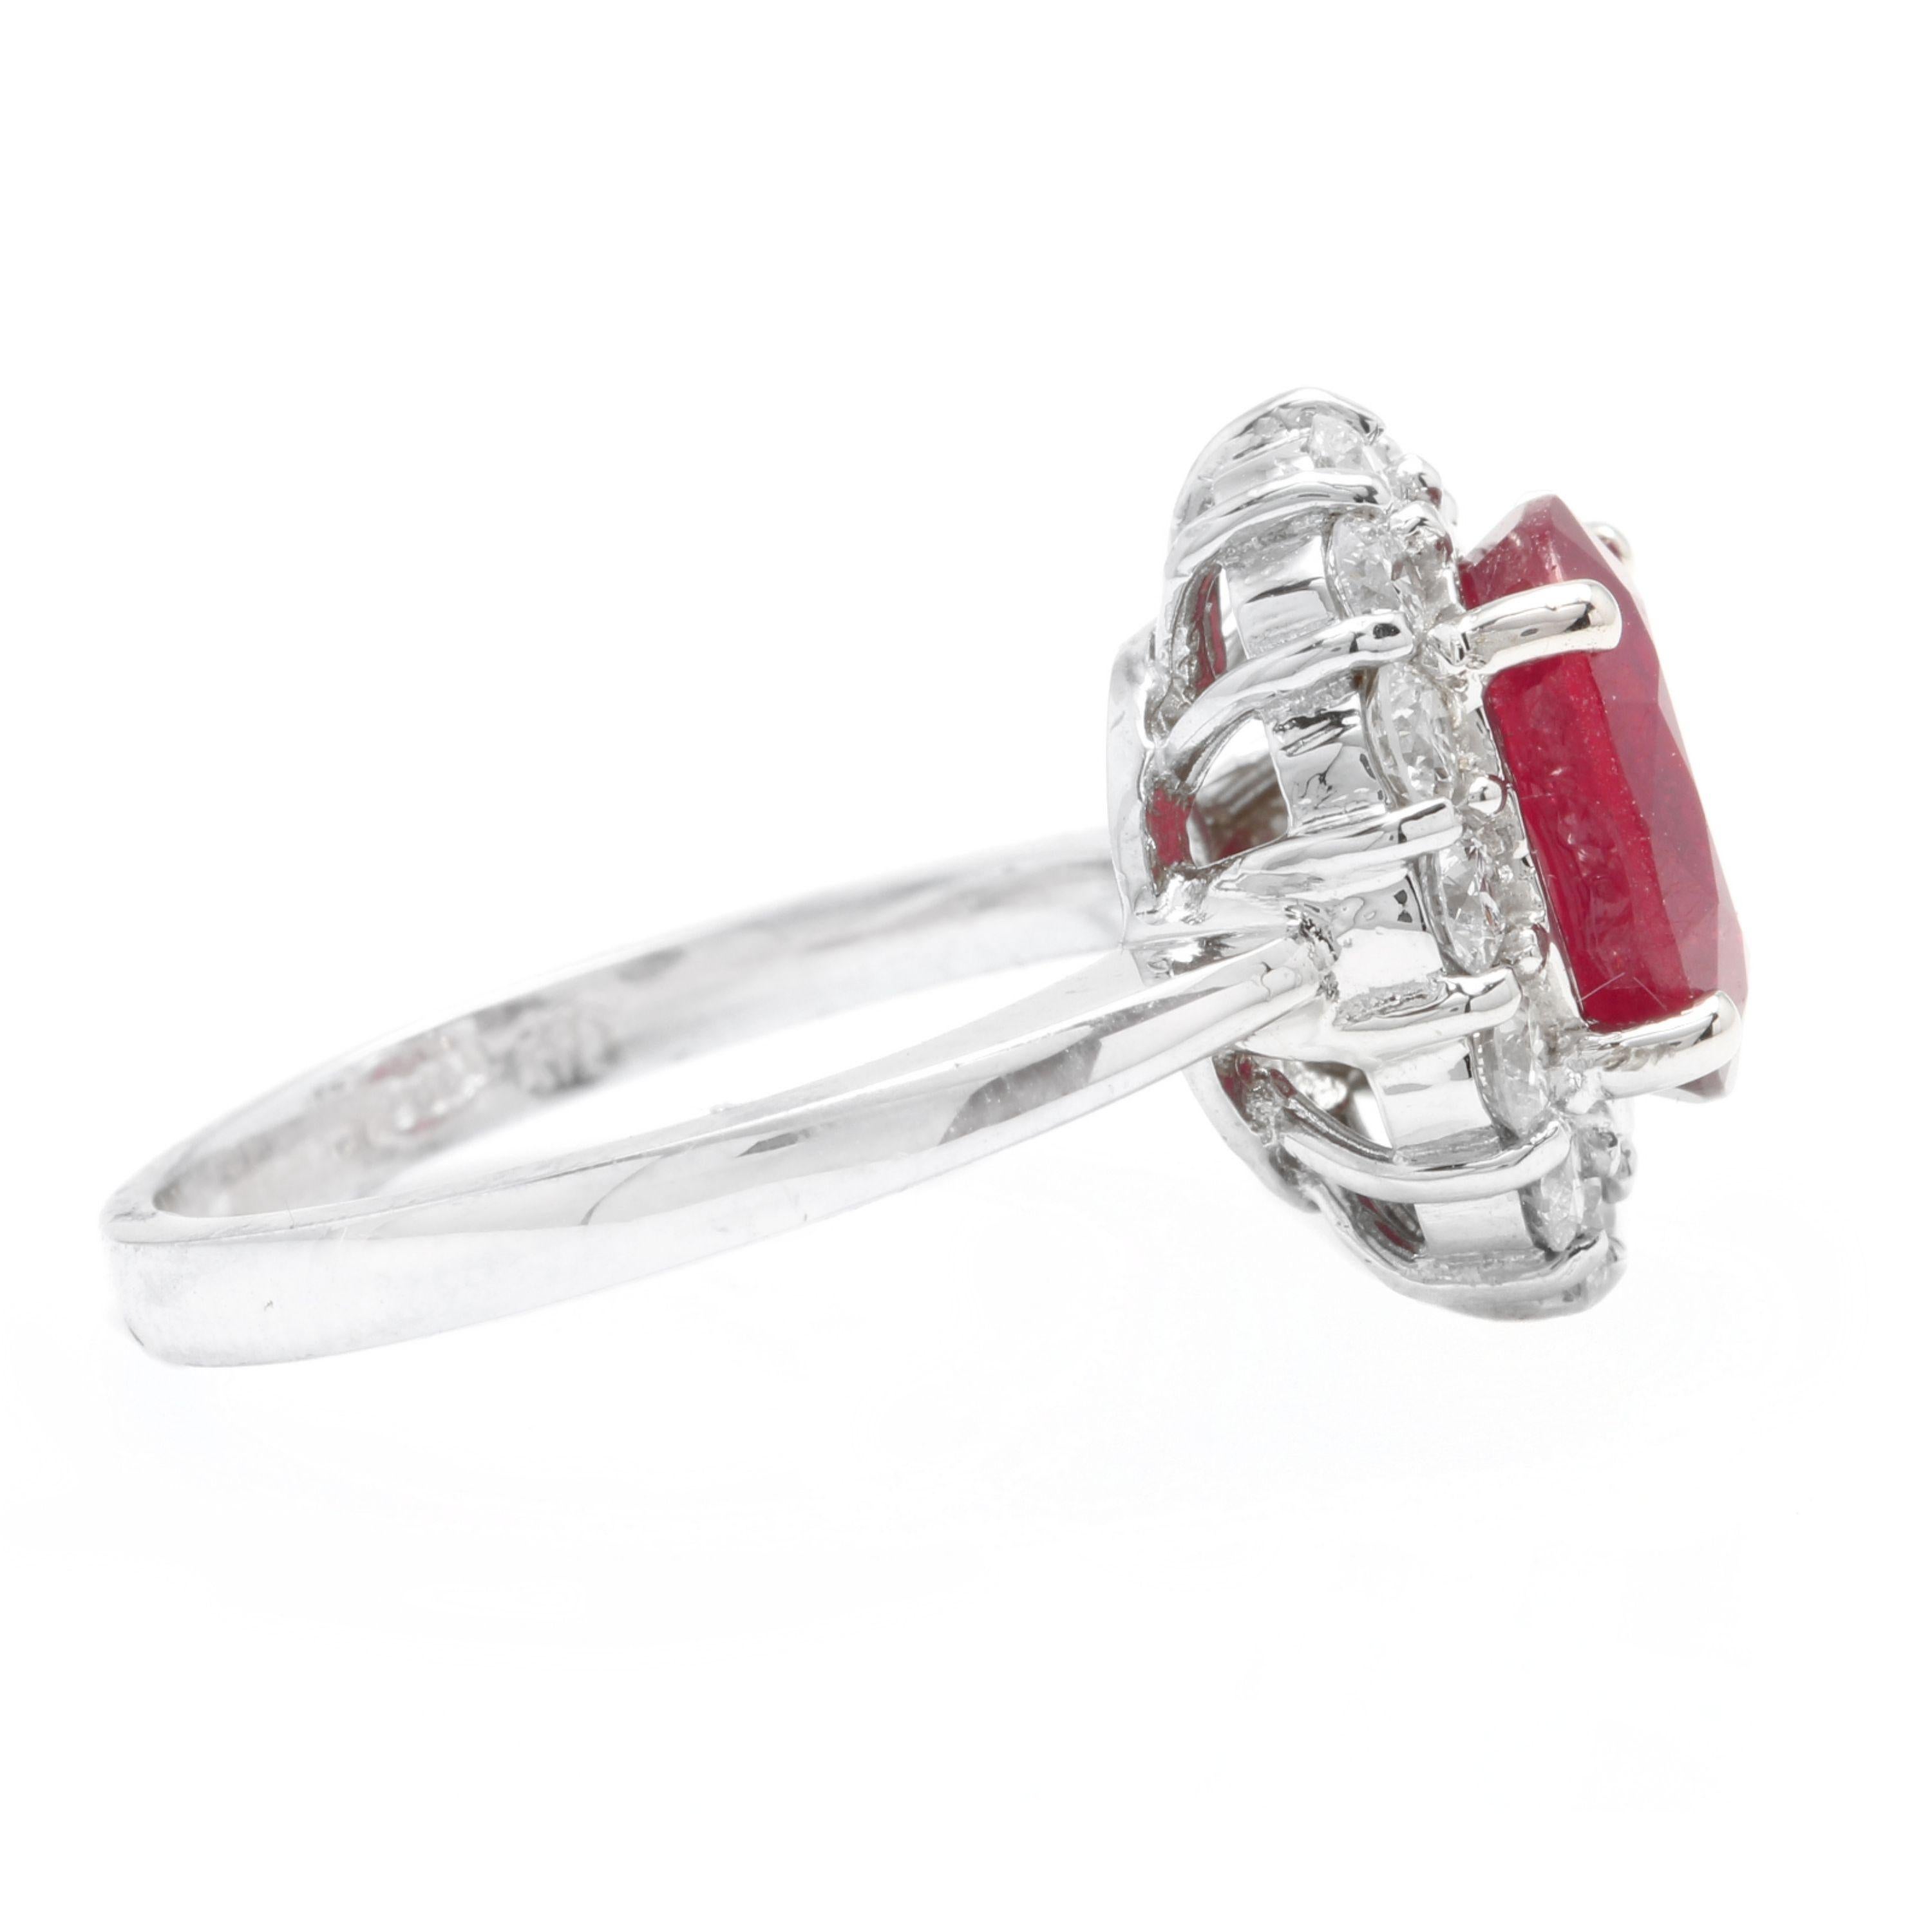 Mixed Cut 5.00 Carat Impressive Red Ruby and Natural Diamond 14 Karat White Gold Ring For Sale